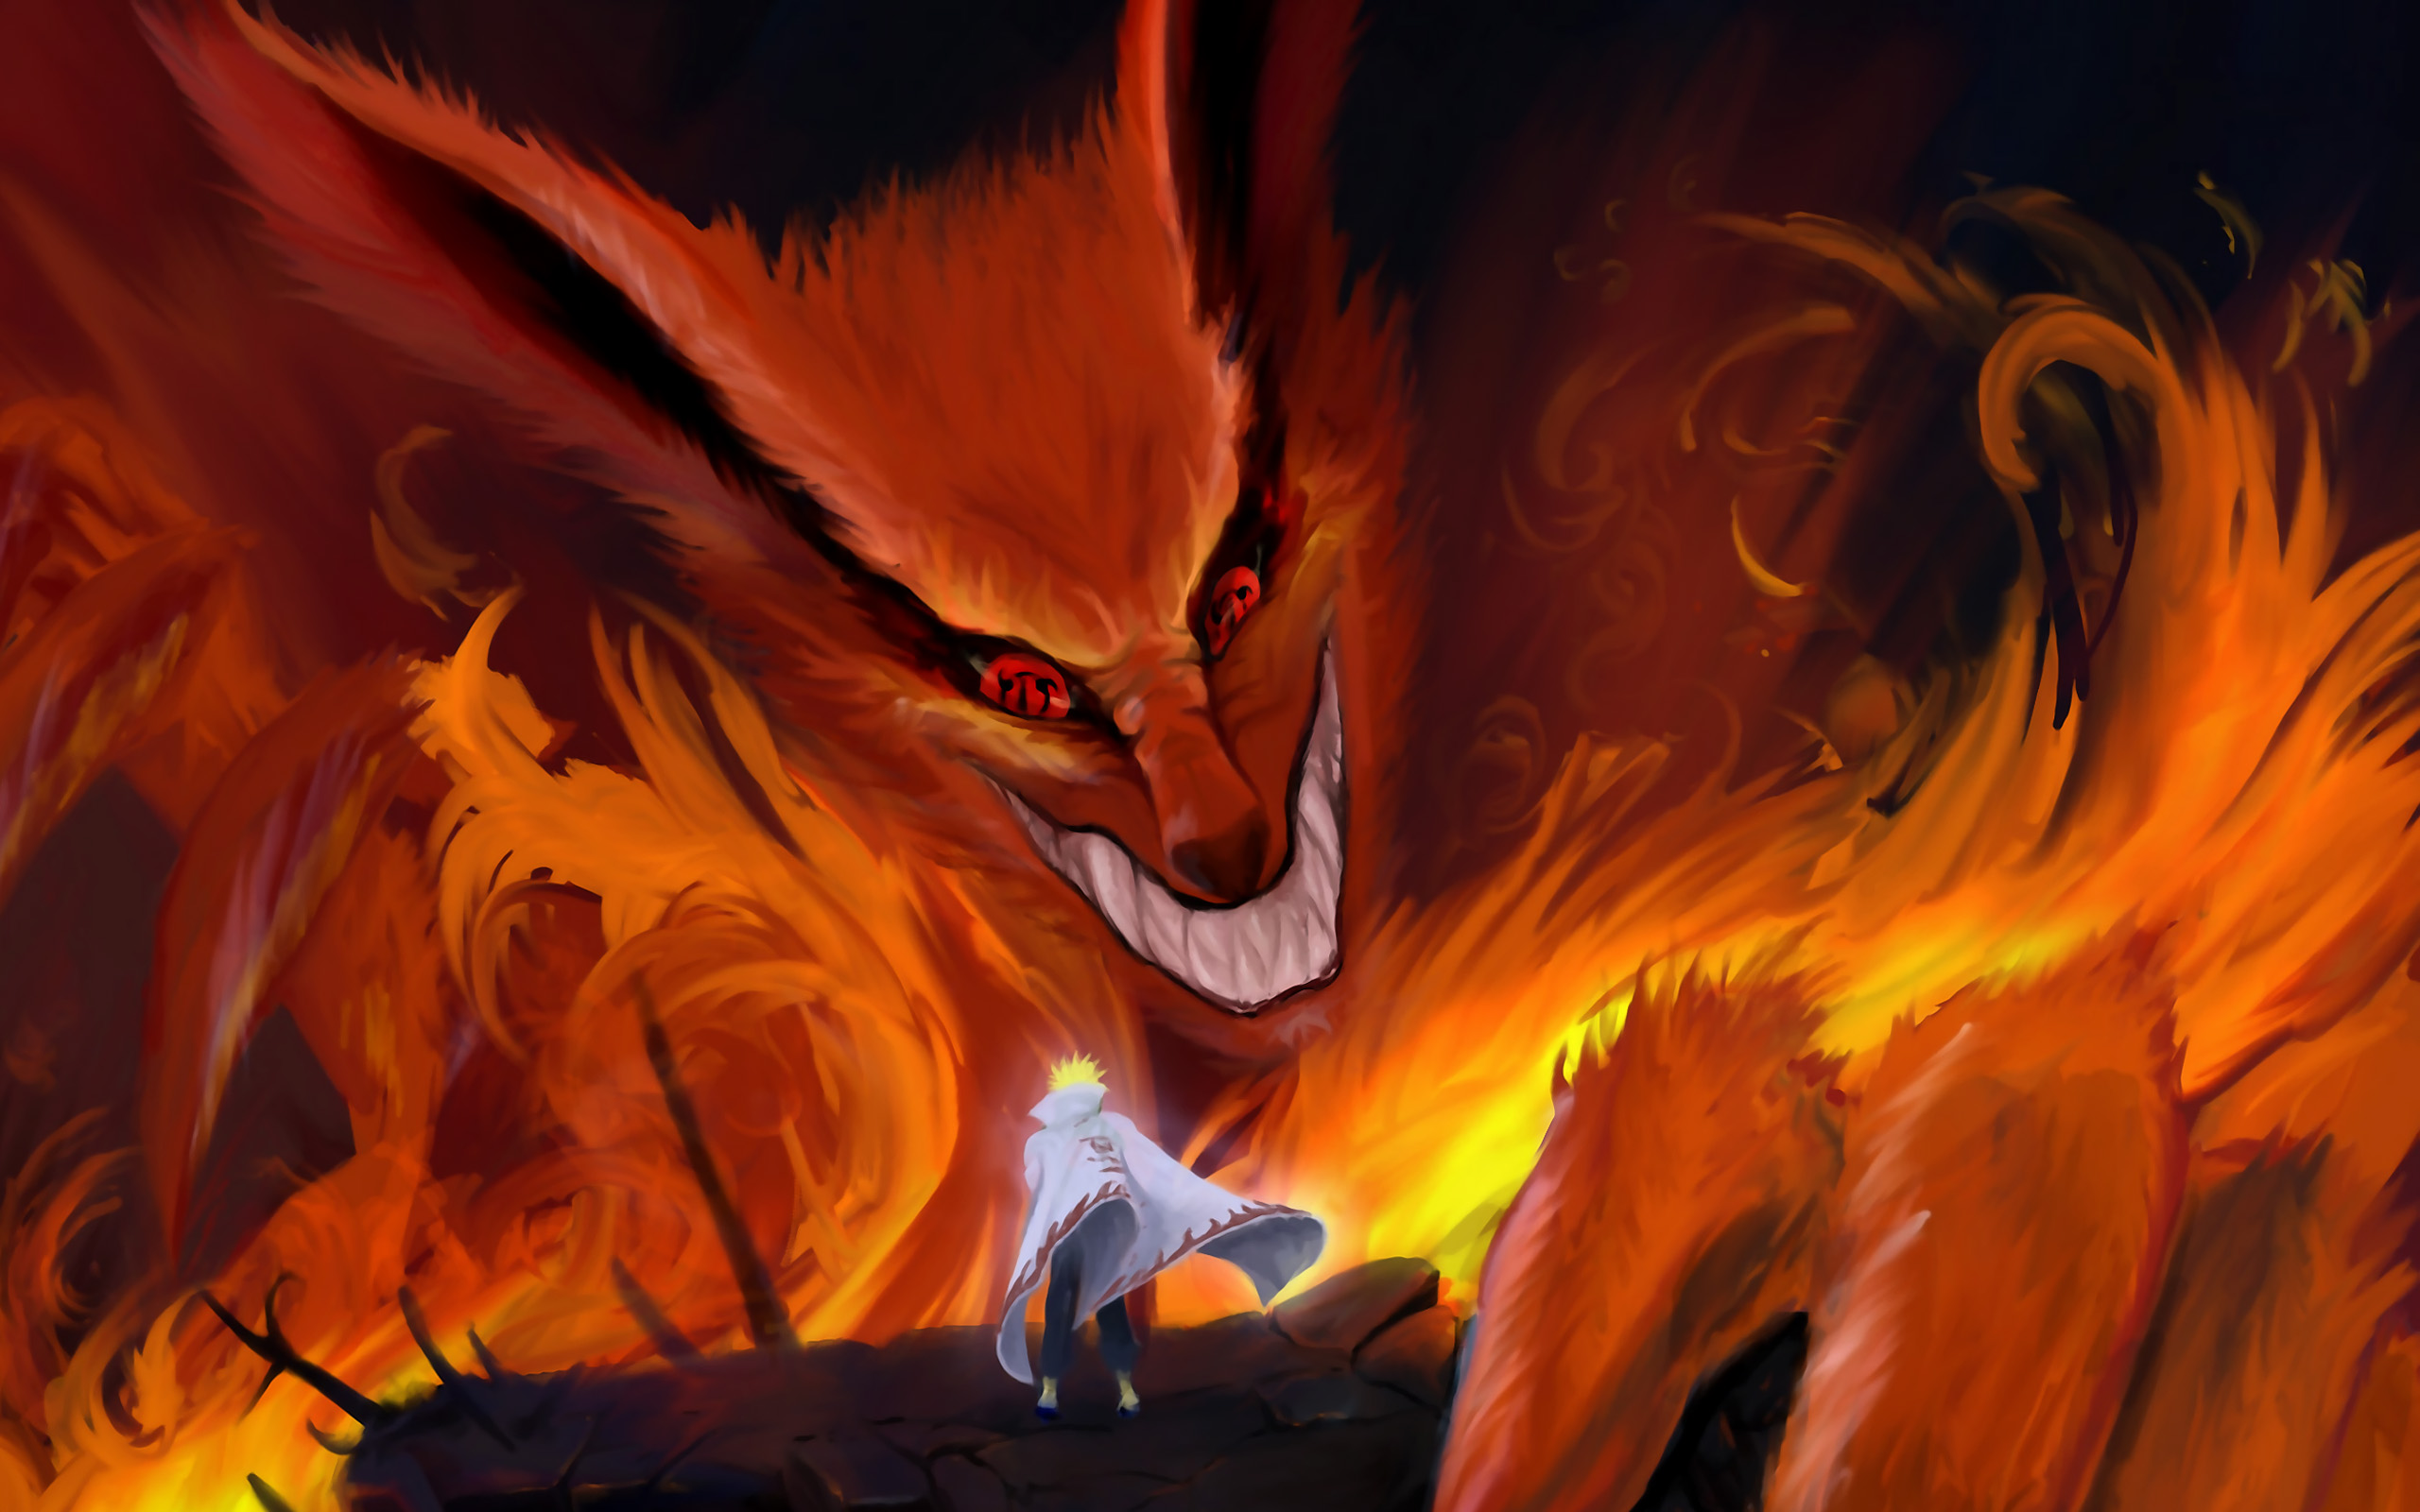 Naruto 9 Tails Wallpapers